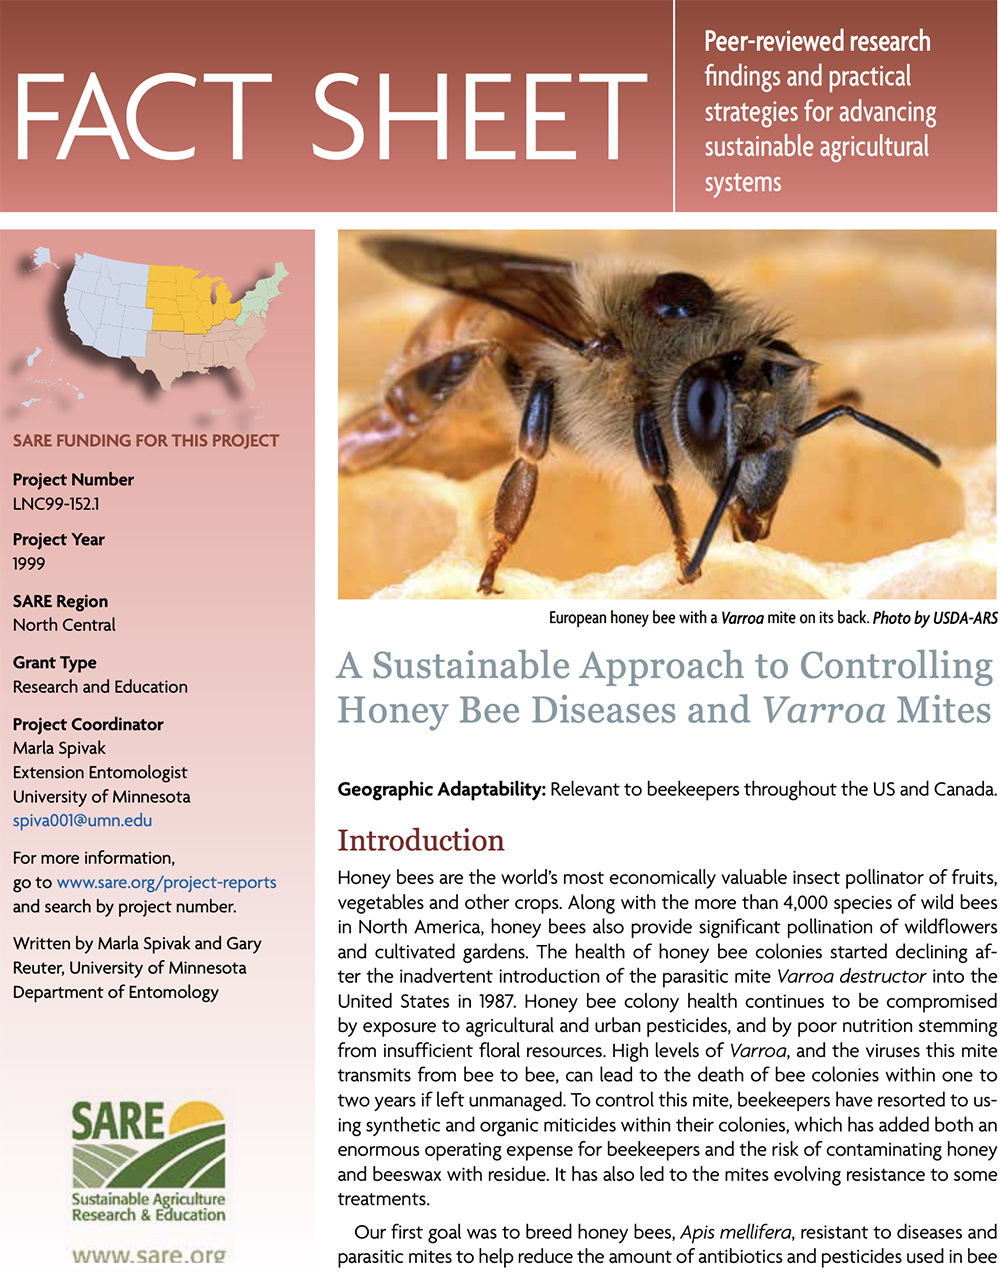 https://www.sare.org/wp-content/uploads/Controlling-Honey-Bee-Diseases-Fact-Sheet-Cover.jpg